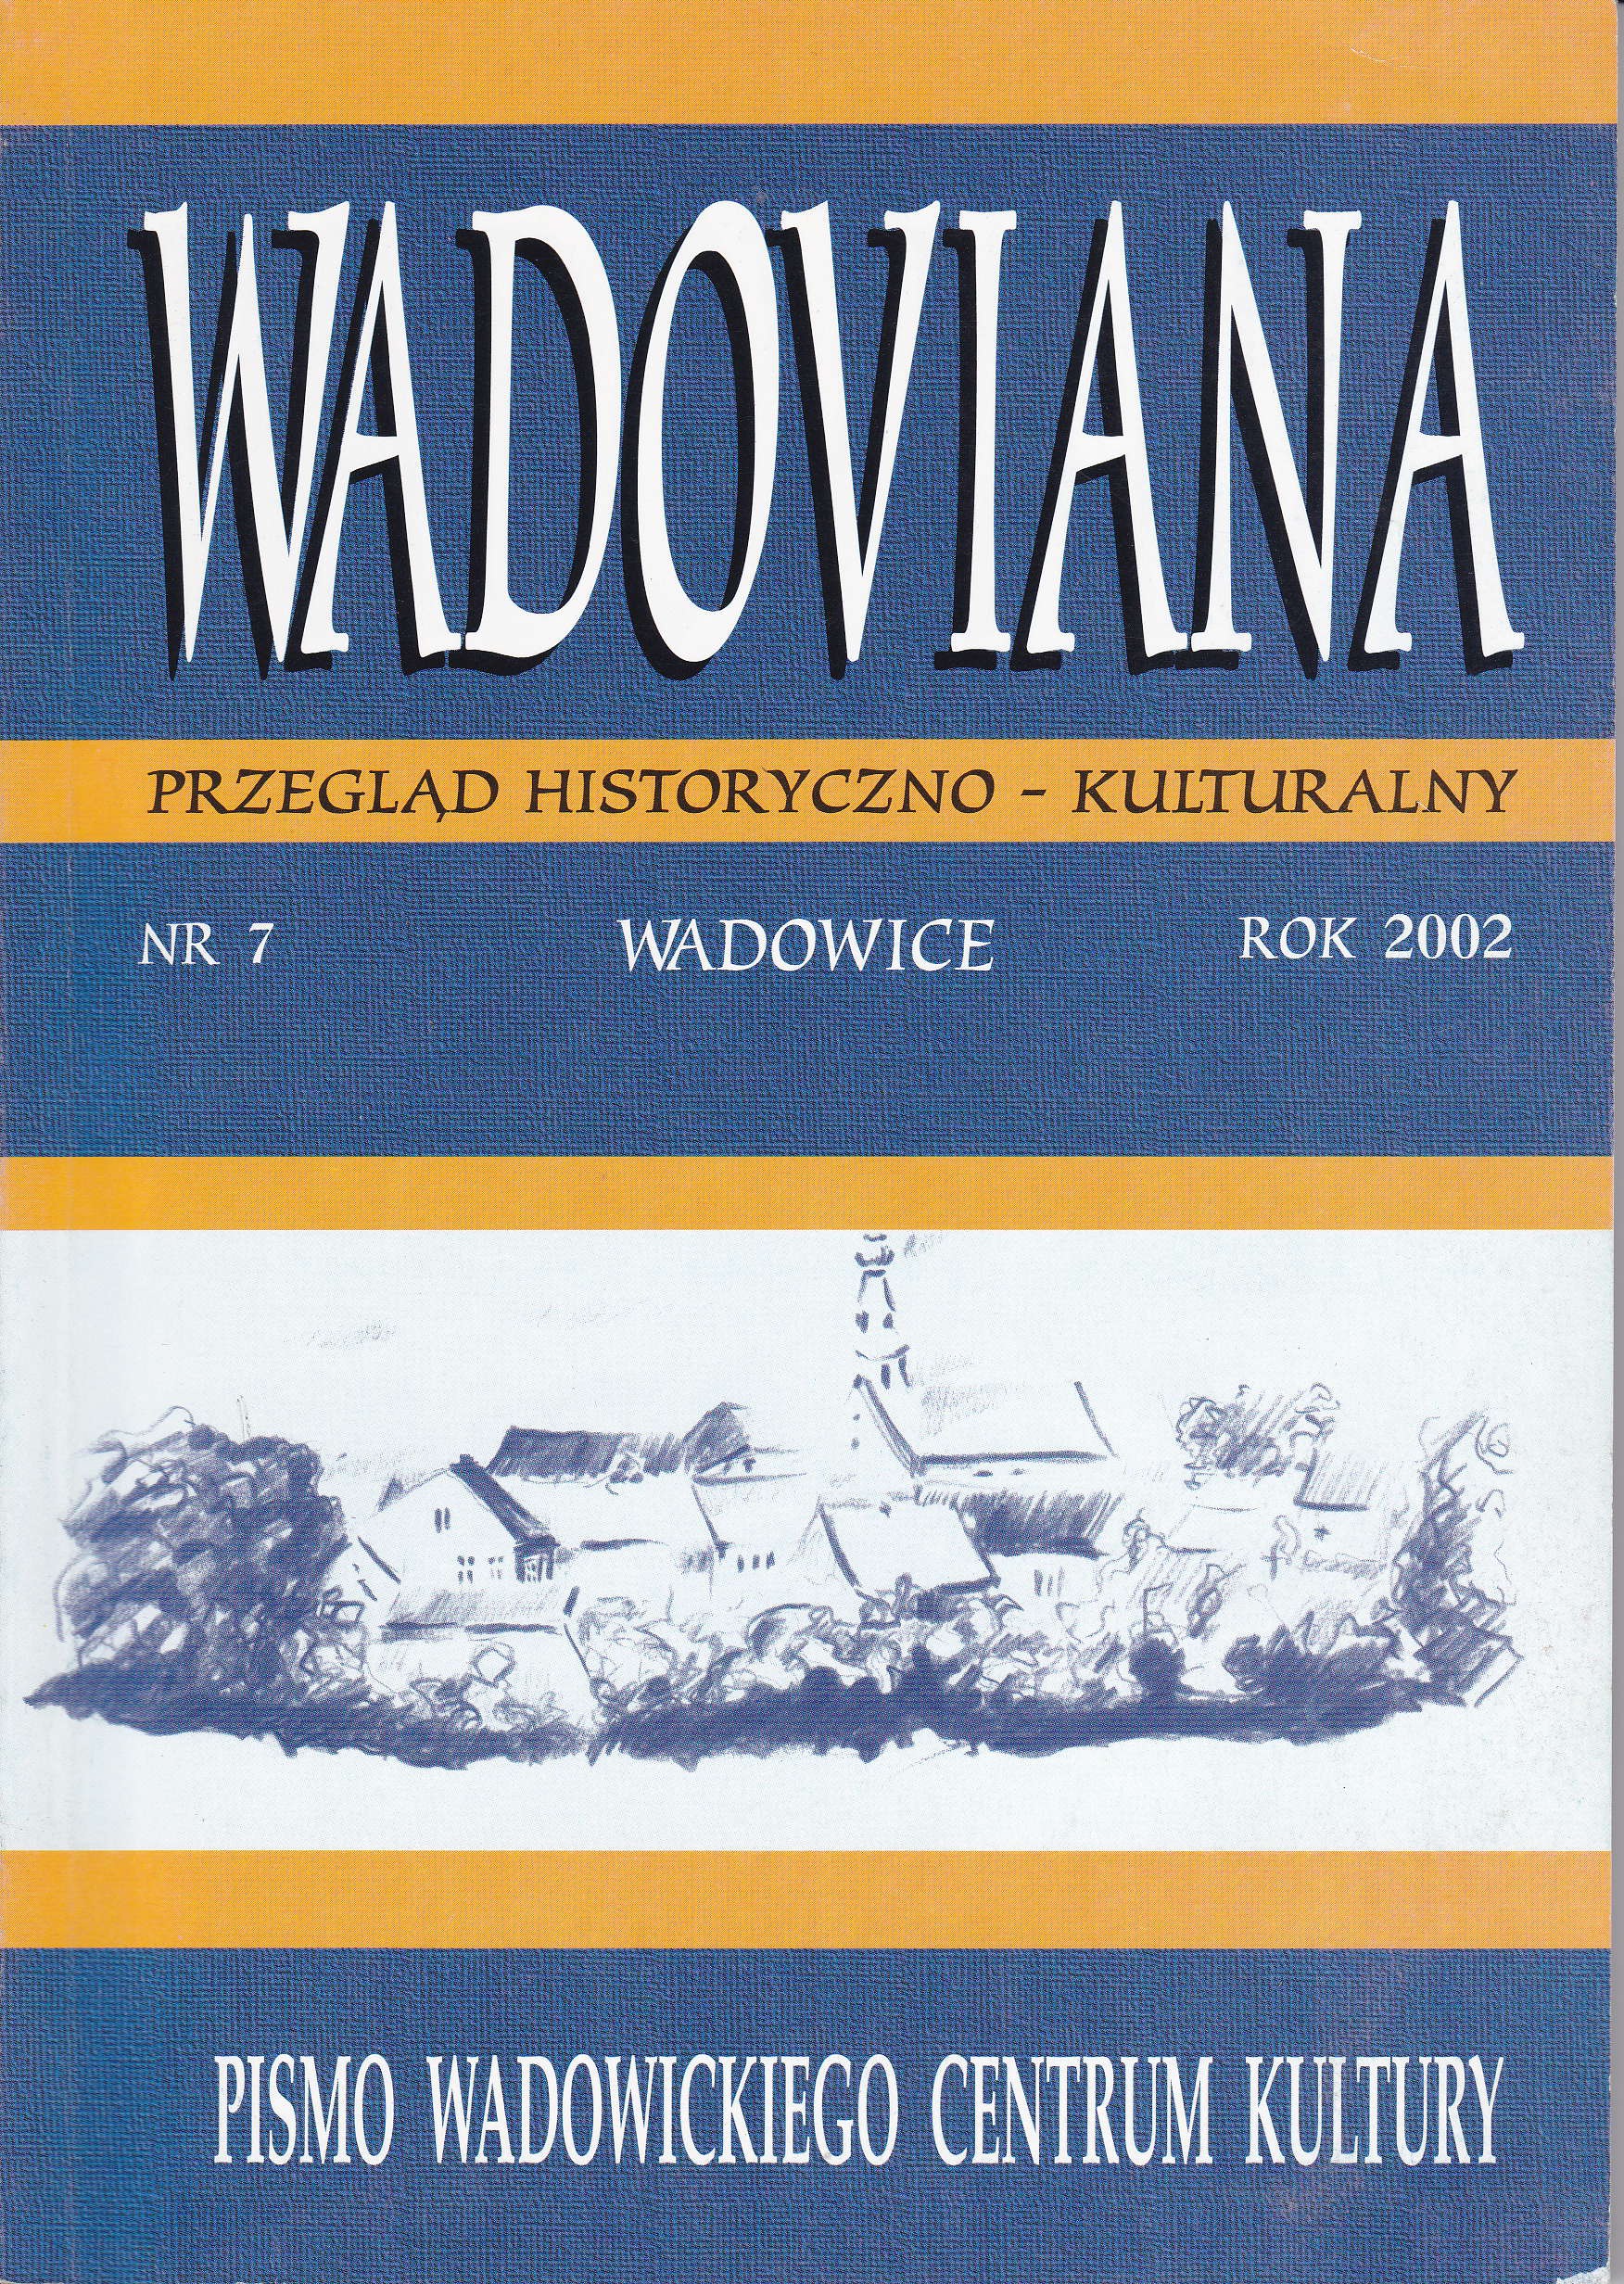 From the history of the Confraternity of the Rosary in Wadowice Cover Image